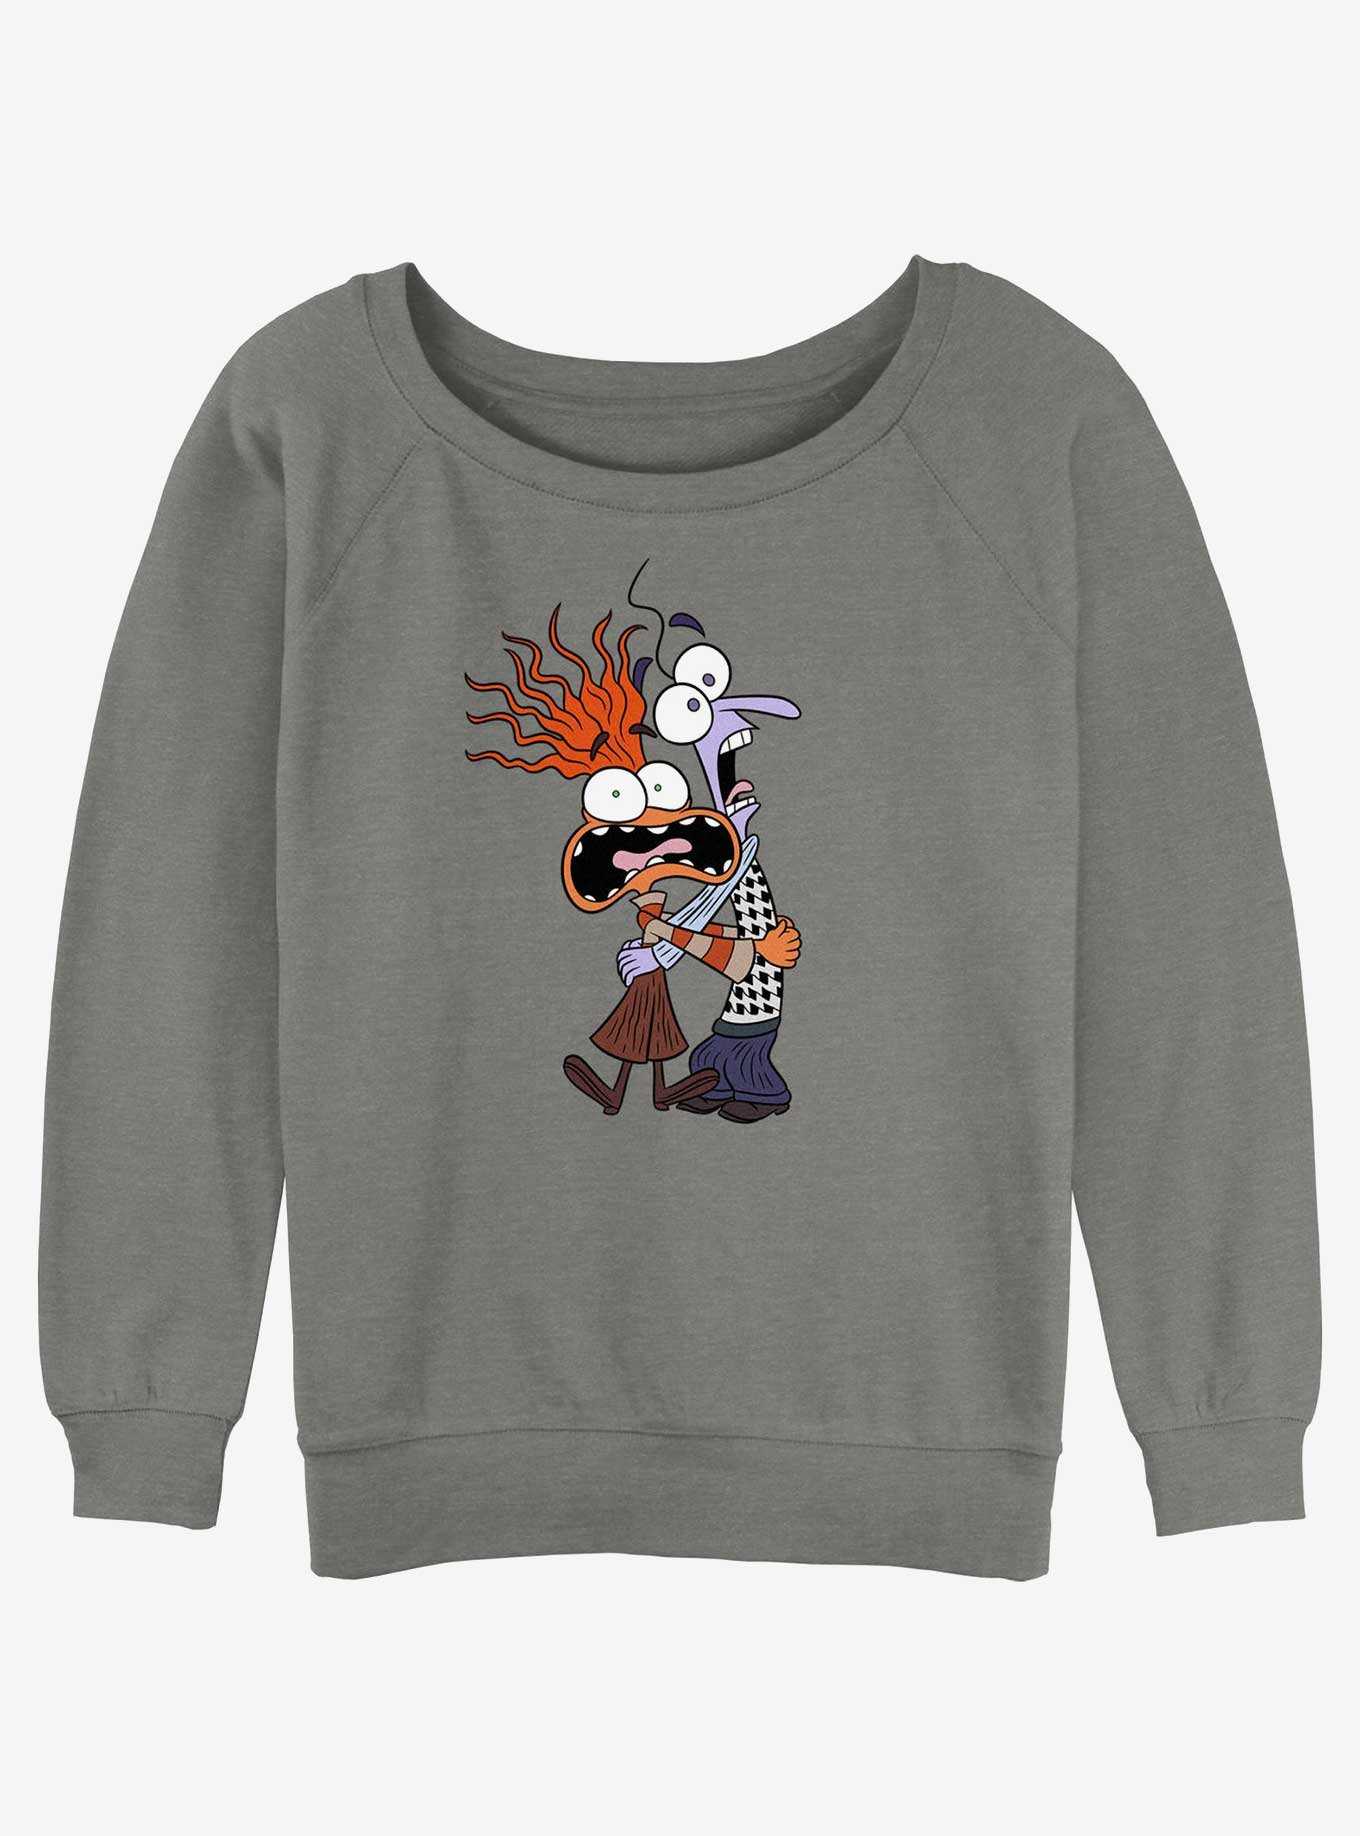 Disney Pixar Inside Out 2 Anxiety And Fear Girls Slouchy Sweatshirt, , hi-res